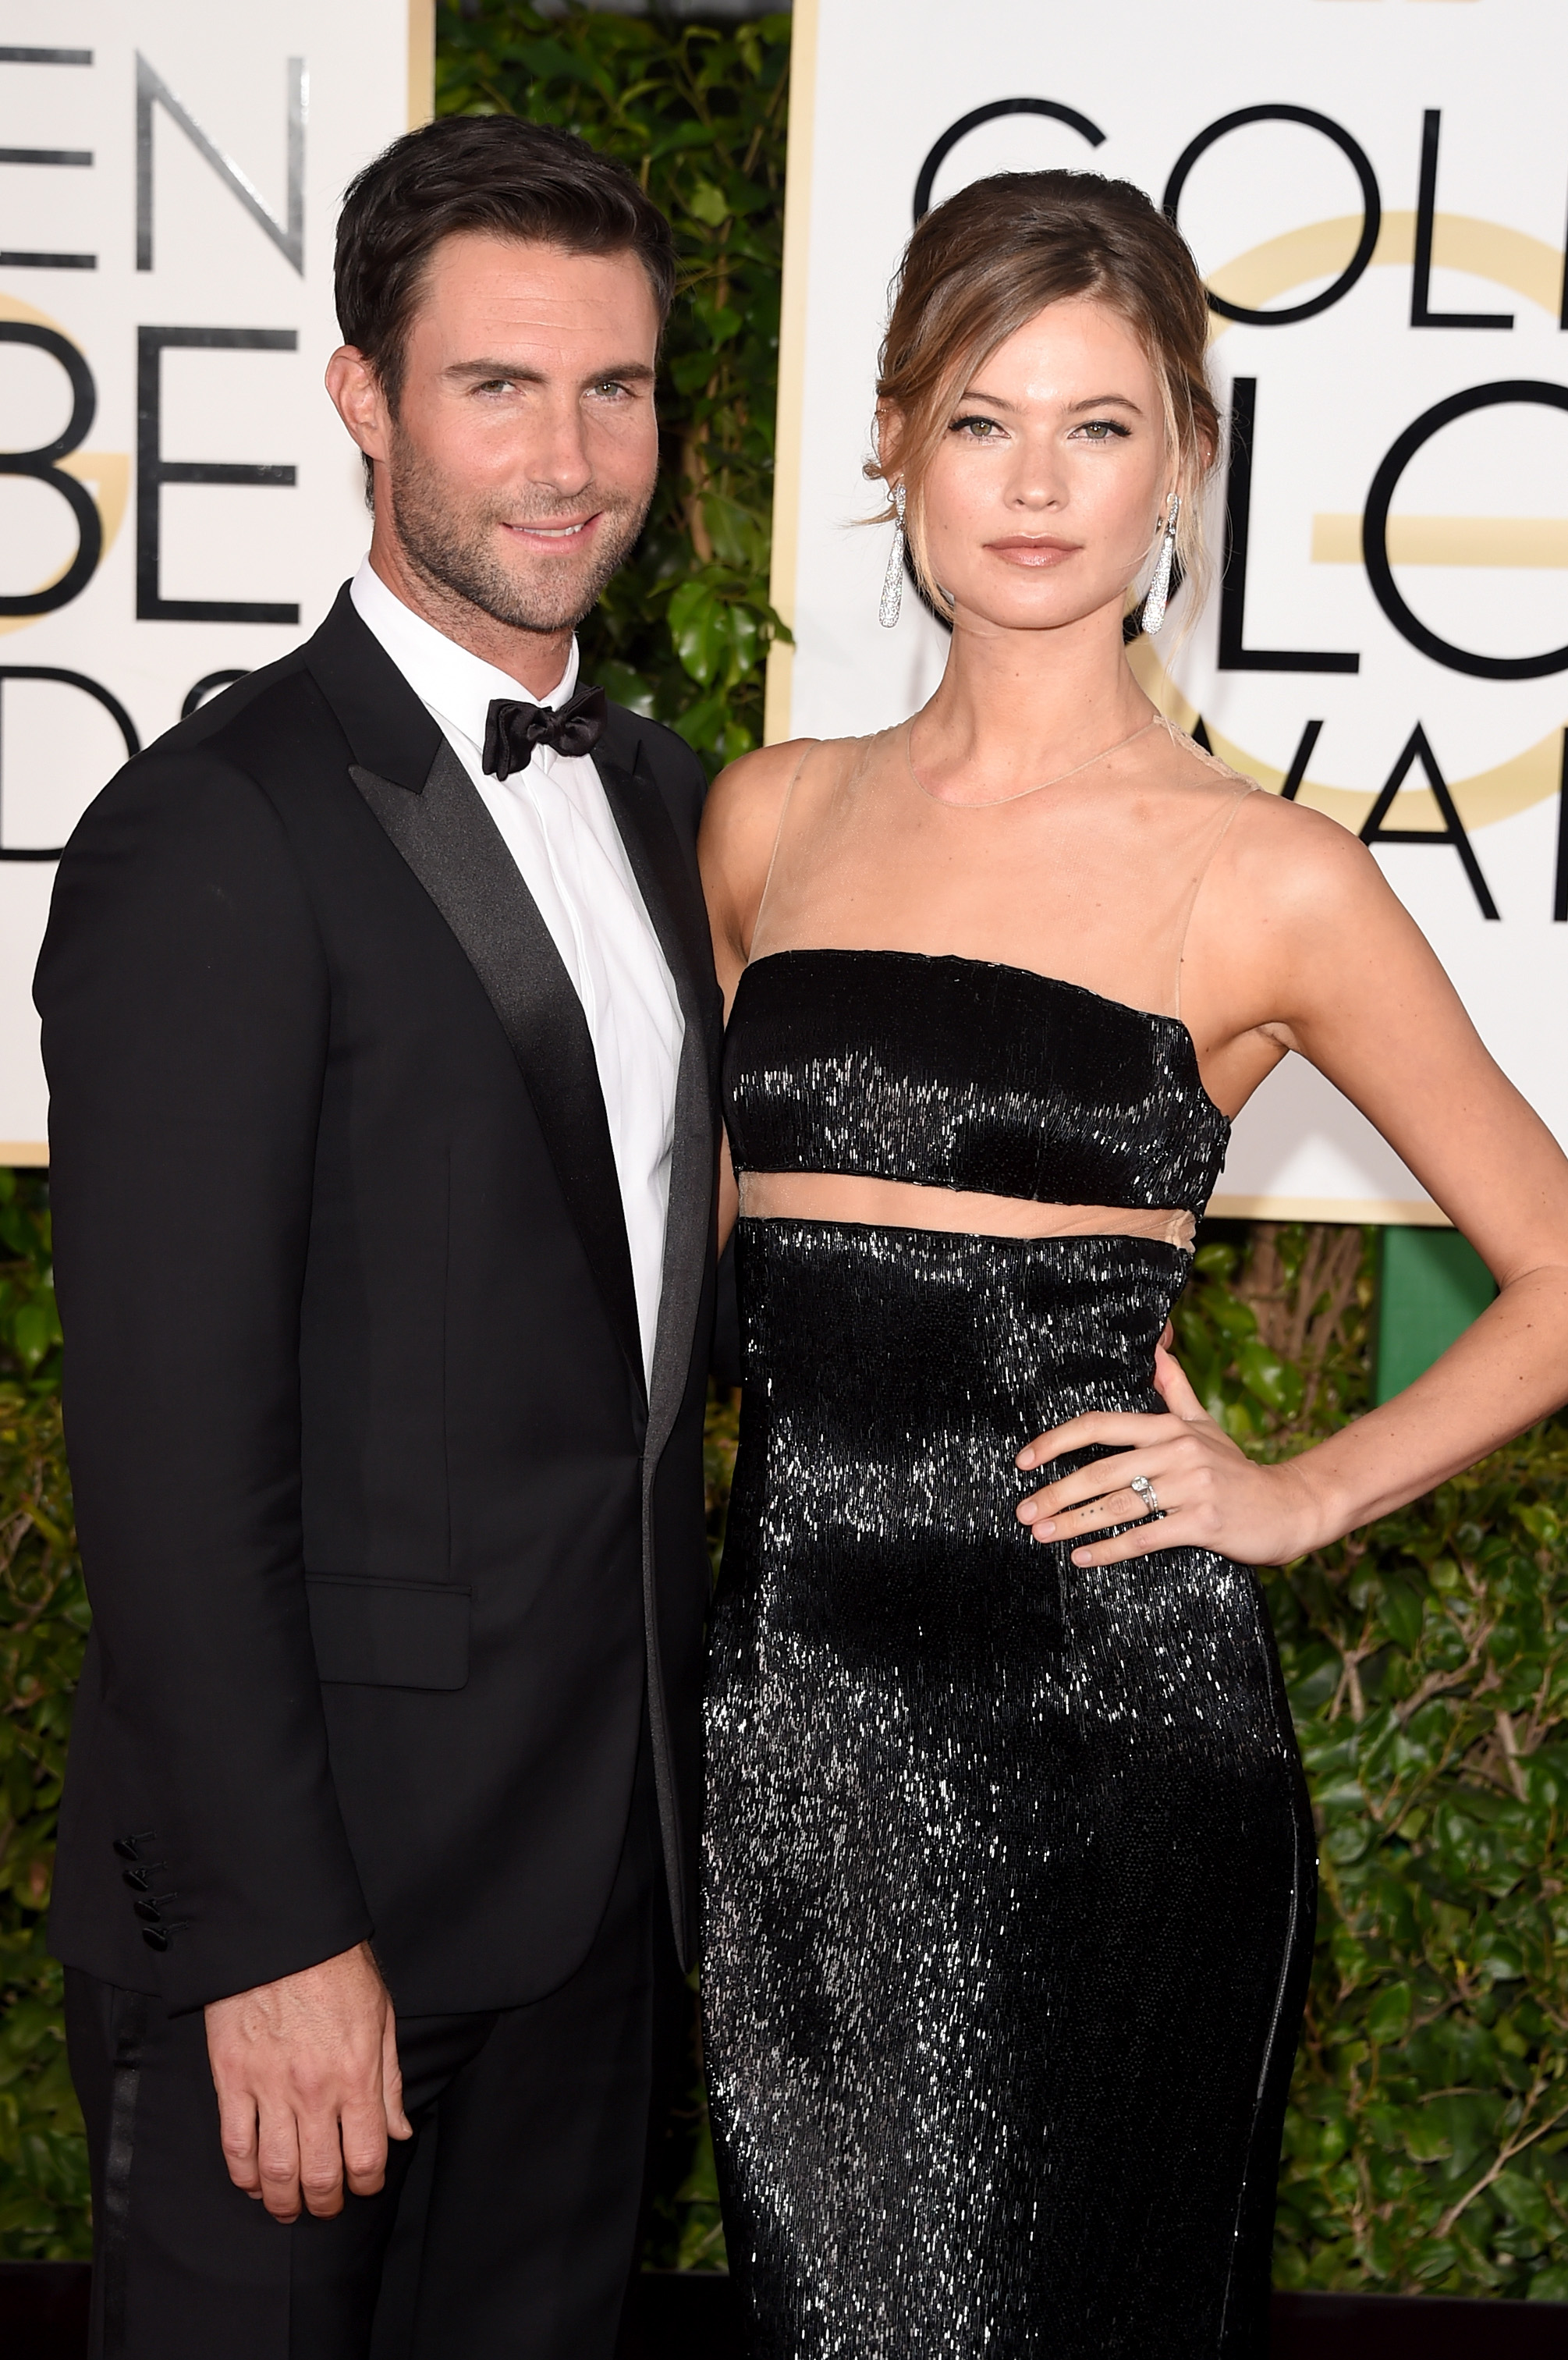 Adam Levine and Behati Prinsloo attend the 72nd Annual Golden Globe Awards at The Beverly Hilton Hotel on January 11, 2015 in Beverly Hills, California.